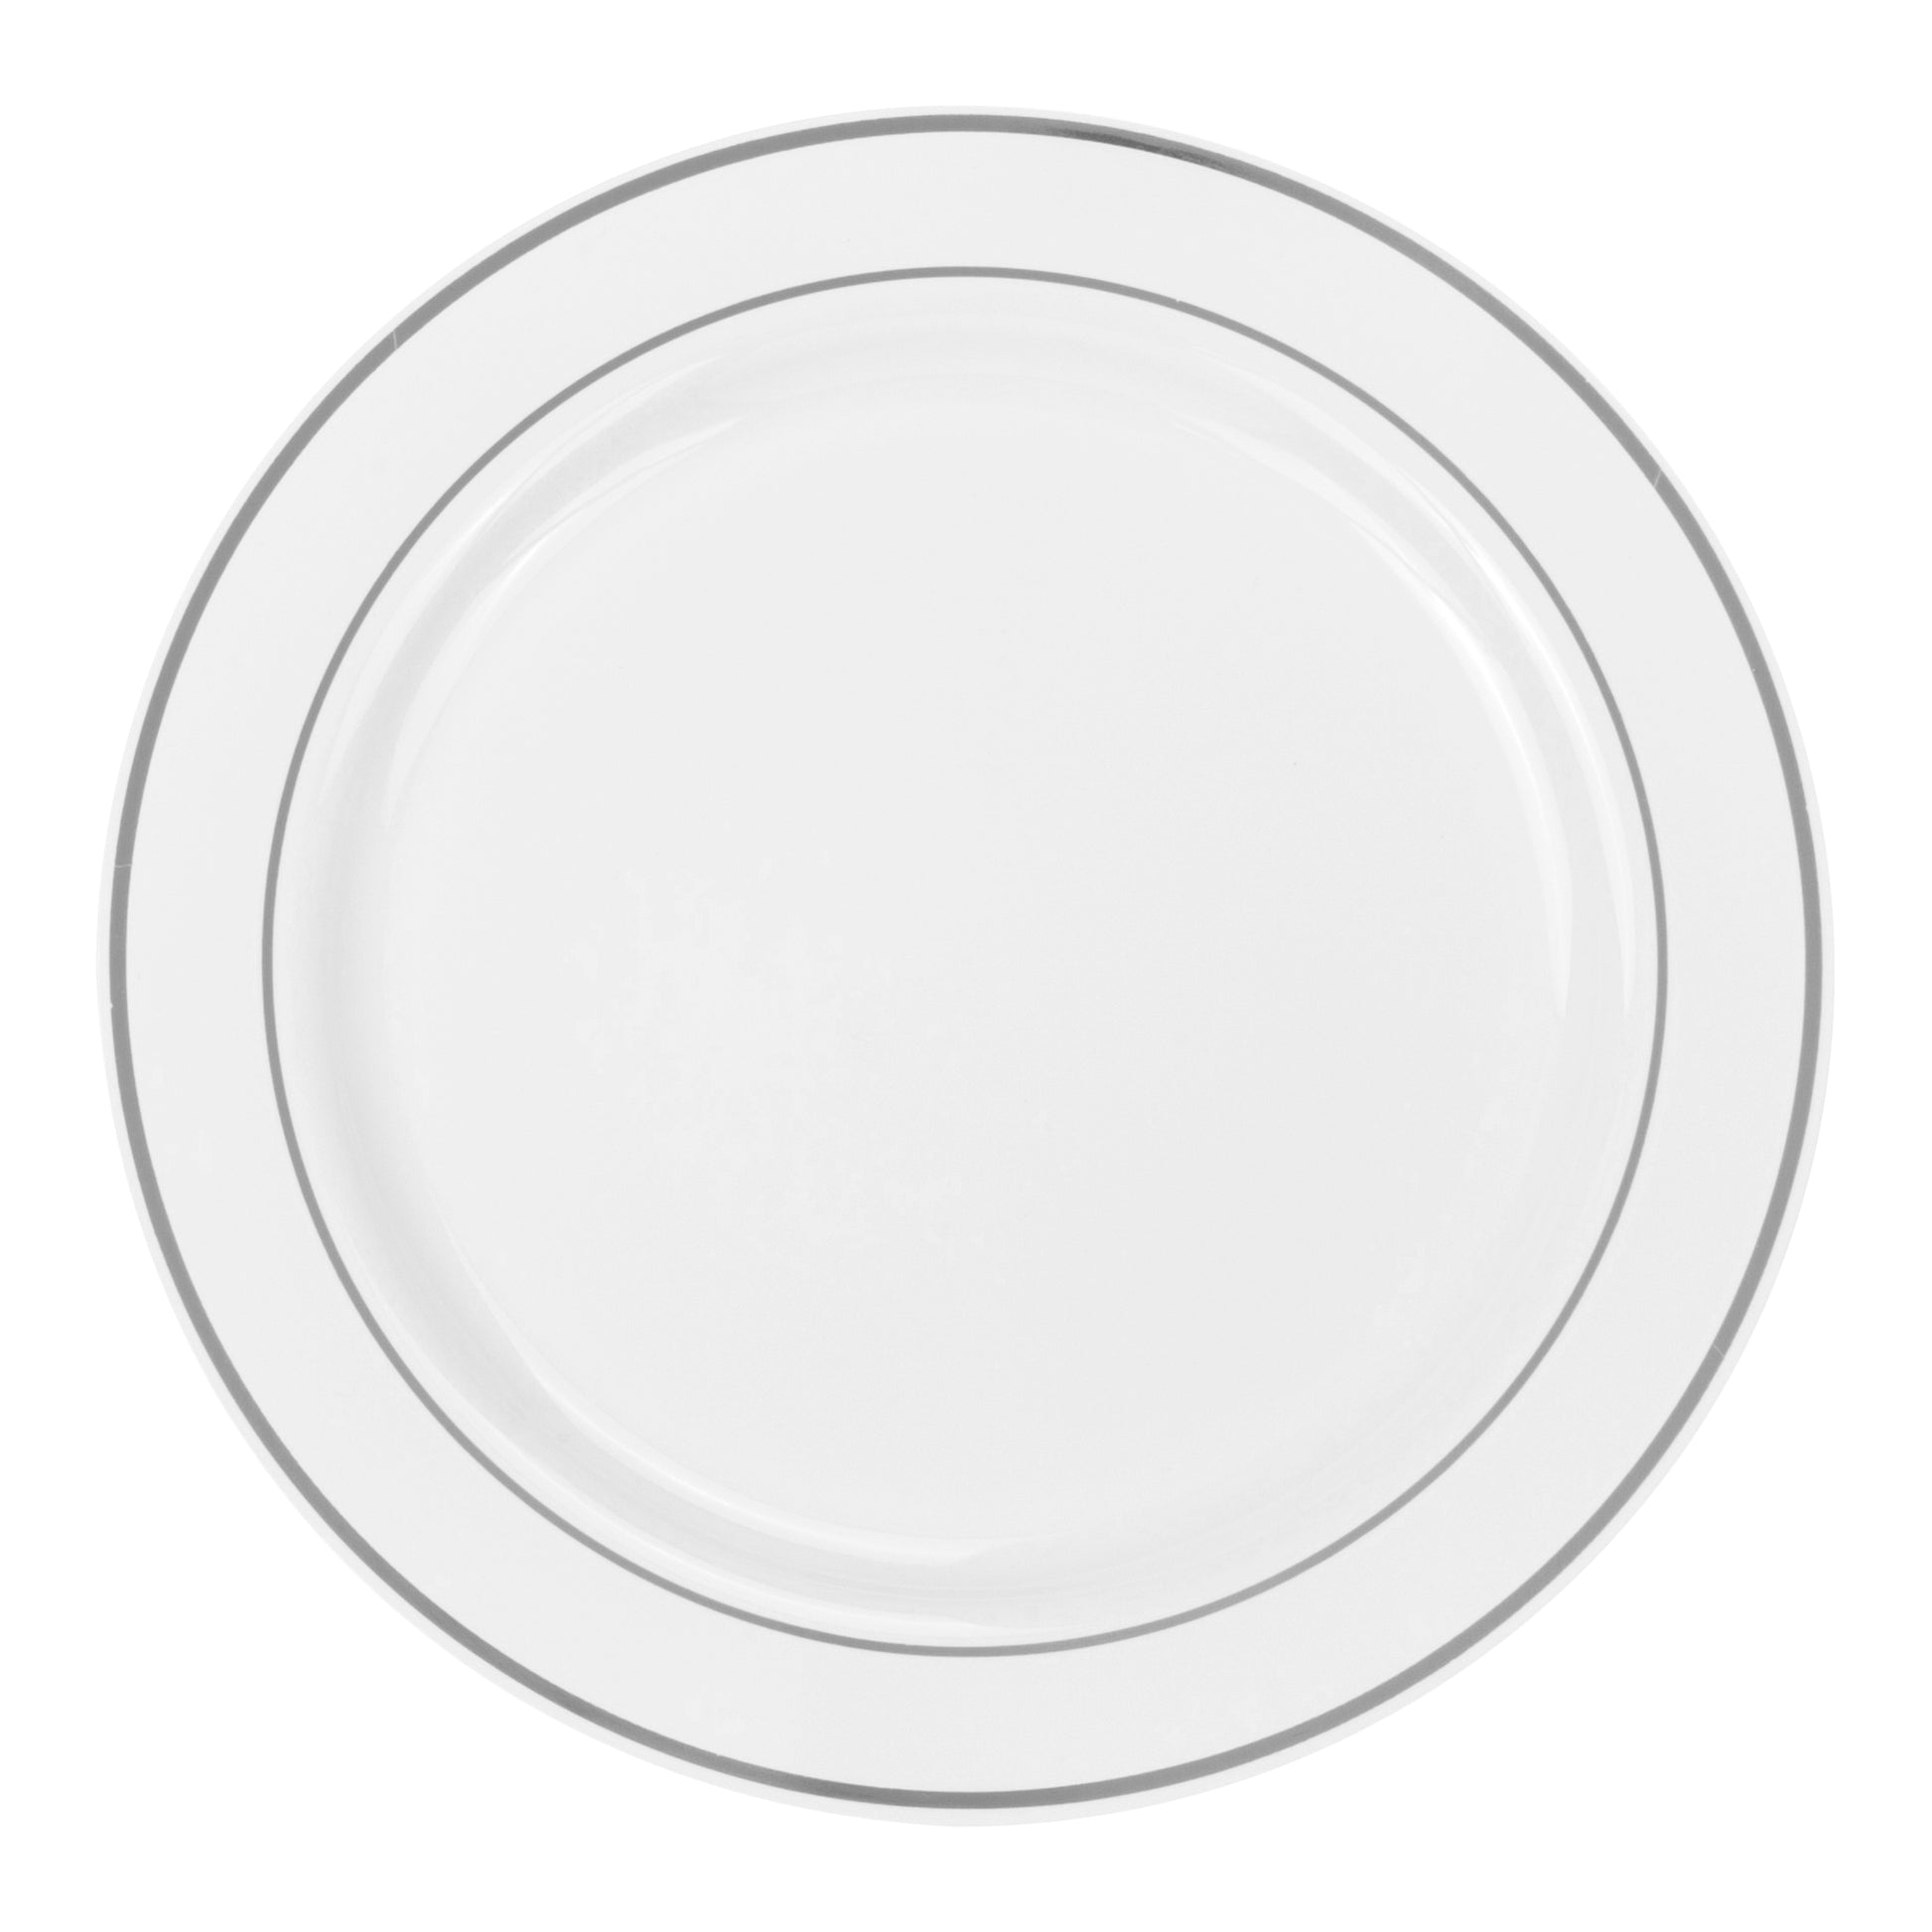 Classic Disposable Plastic Plates 40 pcs Combo Pack - White Silver-Trimmed